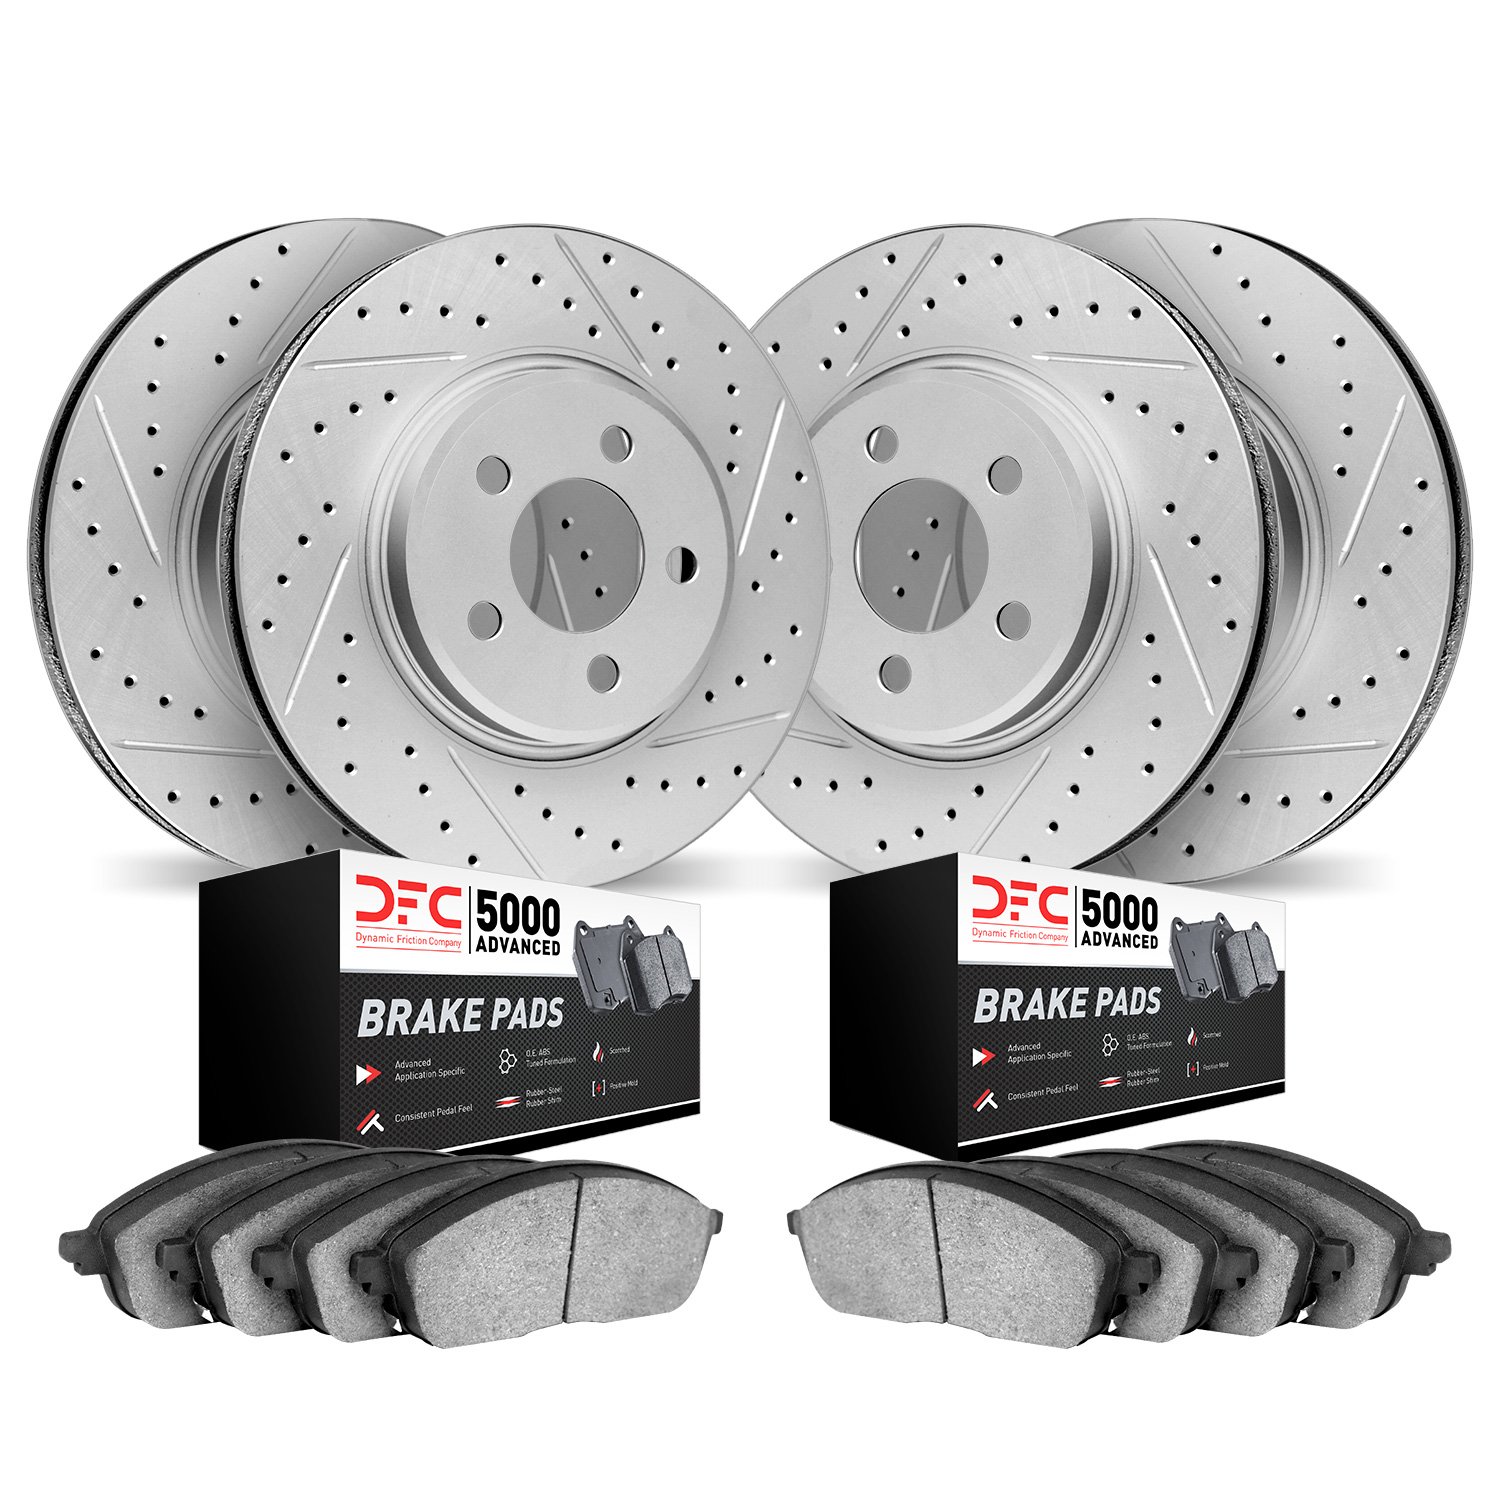 2504-55007 Geoperformance Drilled/Slotted Rotors w/5000 Advanced Brake Pads Kit, 2003-2011 Ford/Lincoln/Mercury/Mazda, Position: